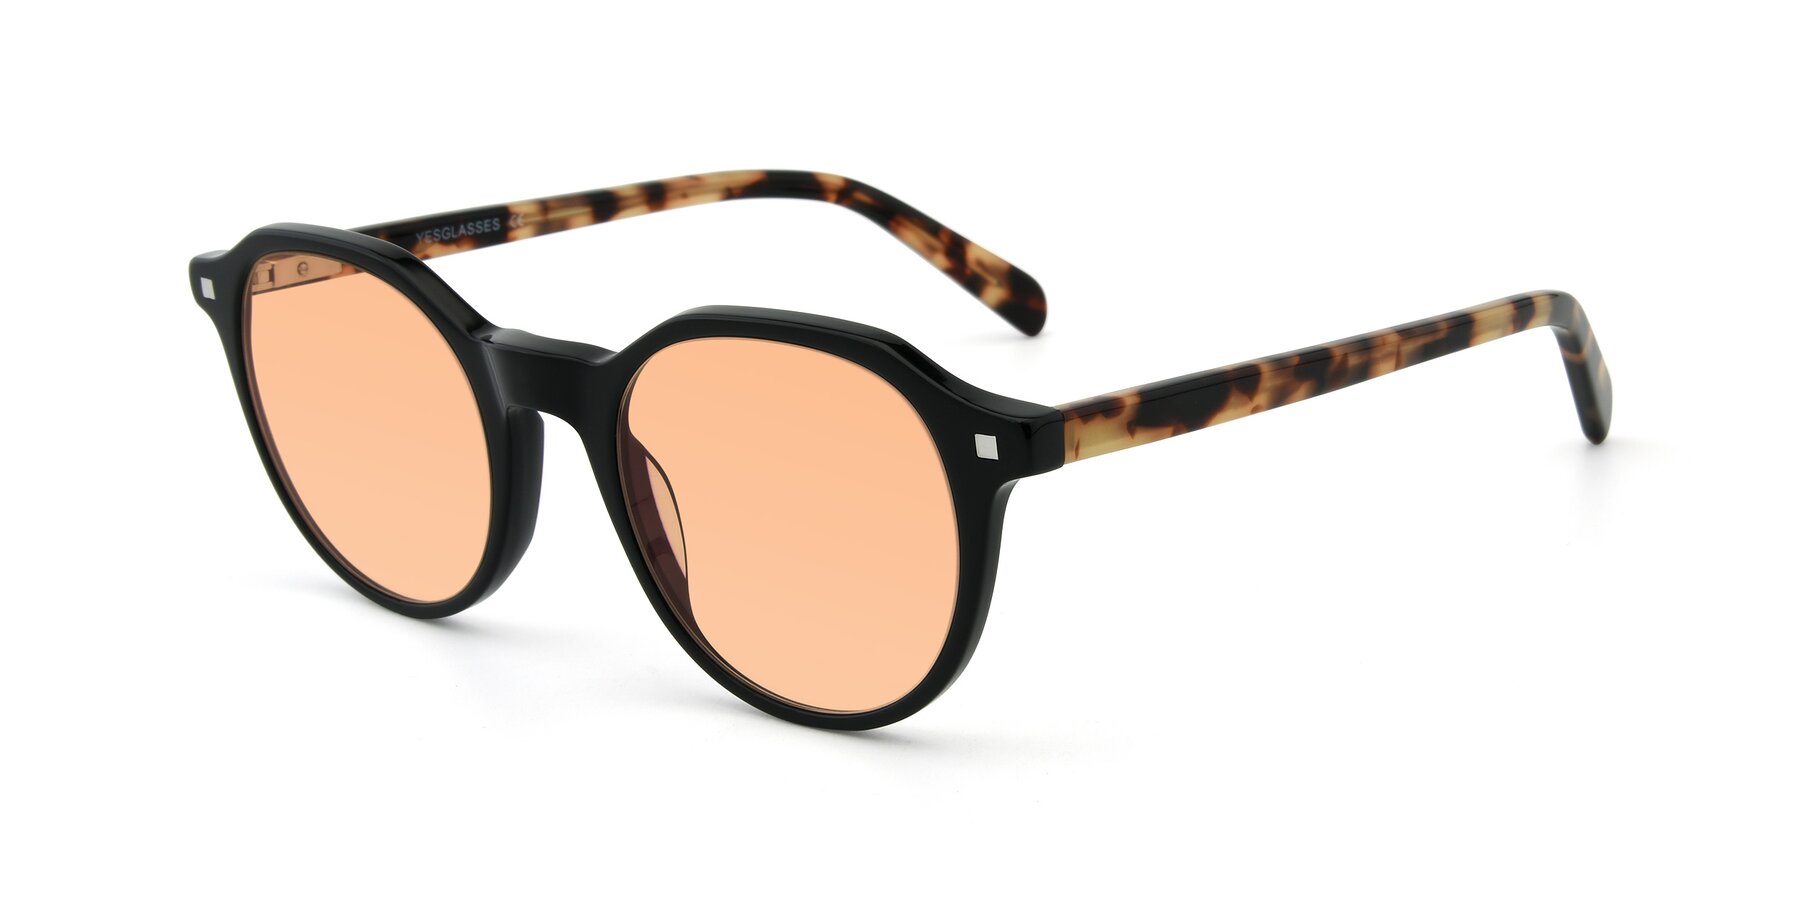 Angle of 17425 in Black with Light Orange Tinted Lenses